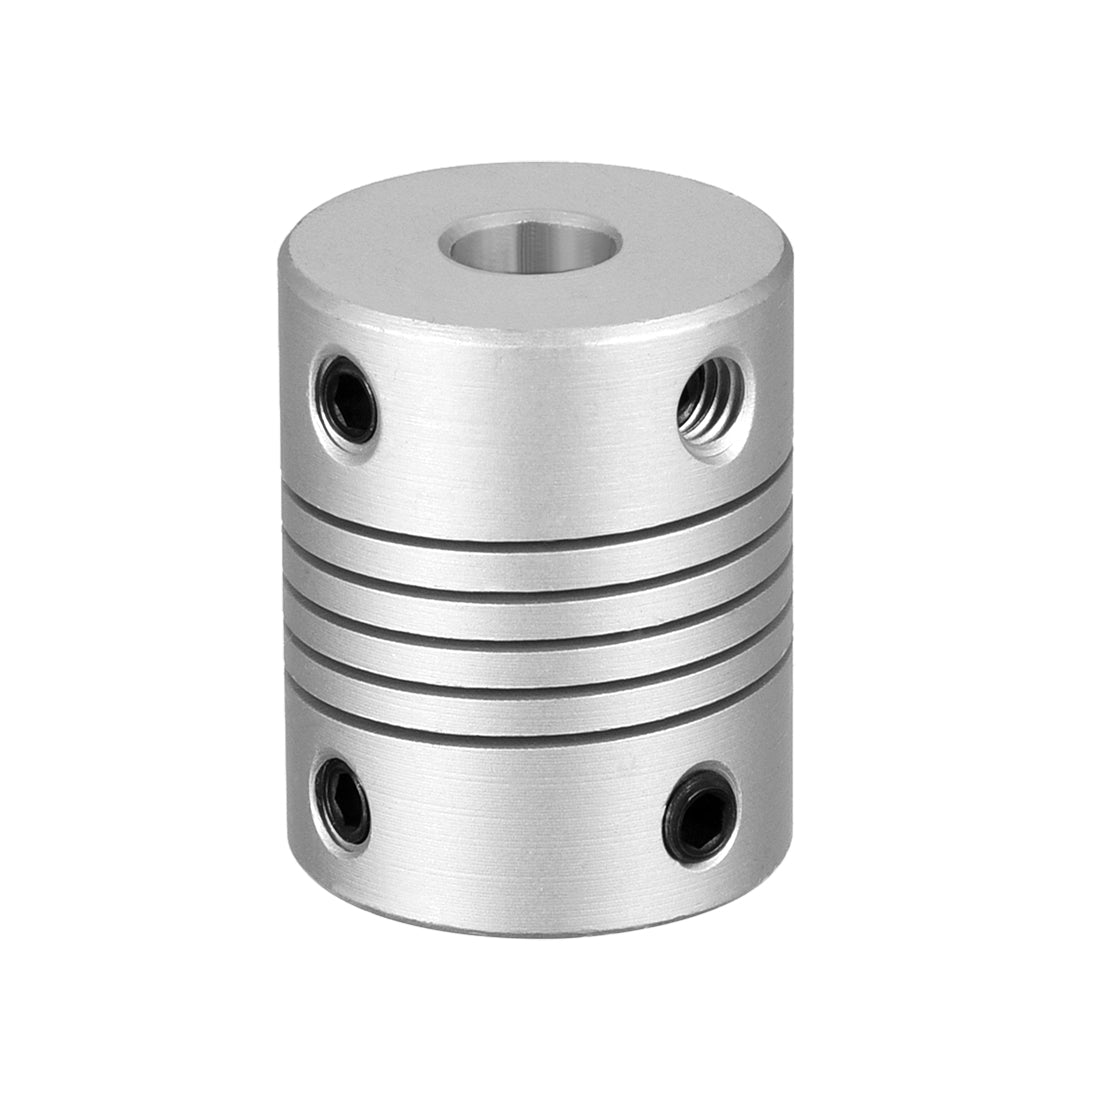 uxcell Uxcell 5mm to 6mm Aluminum Alloy Shaft Coupling Flexible Coupler Motor Connector Joint L25xD19 Silver